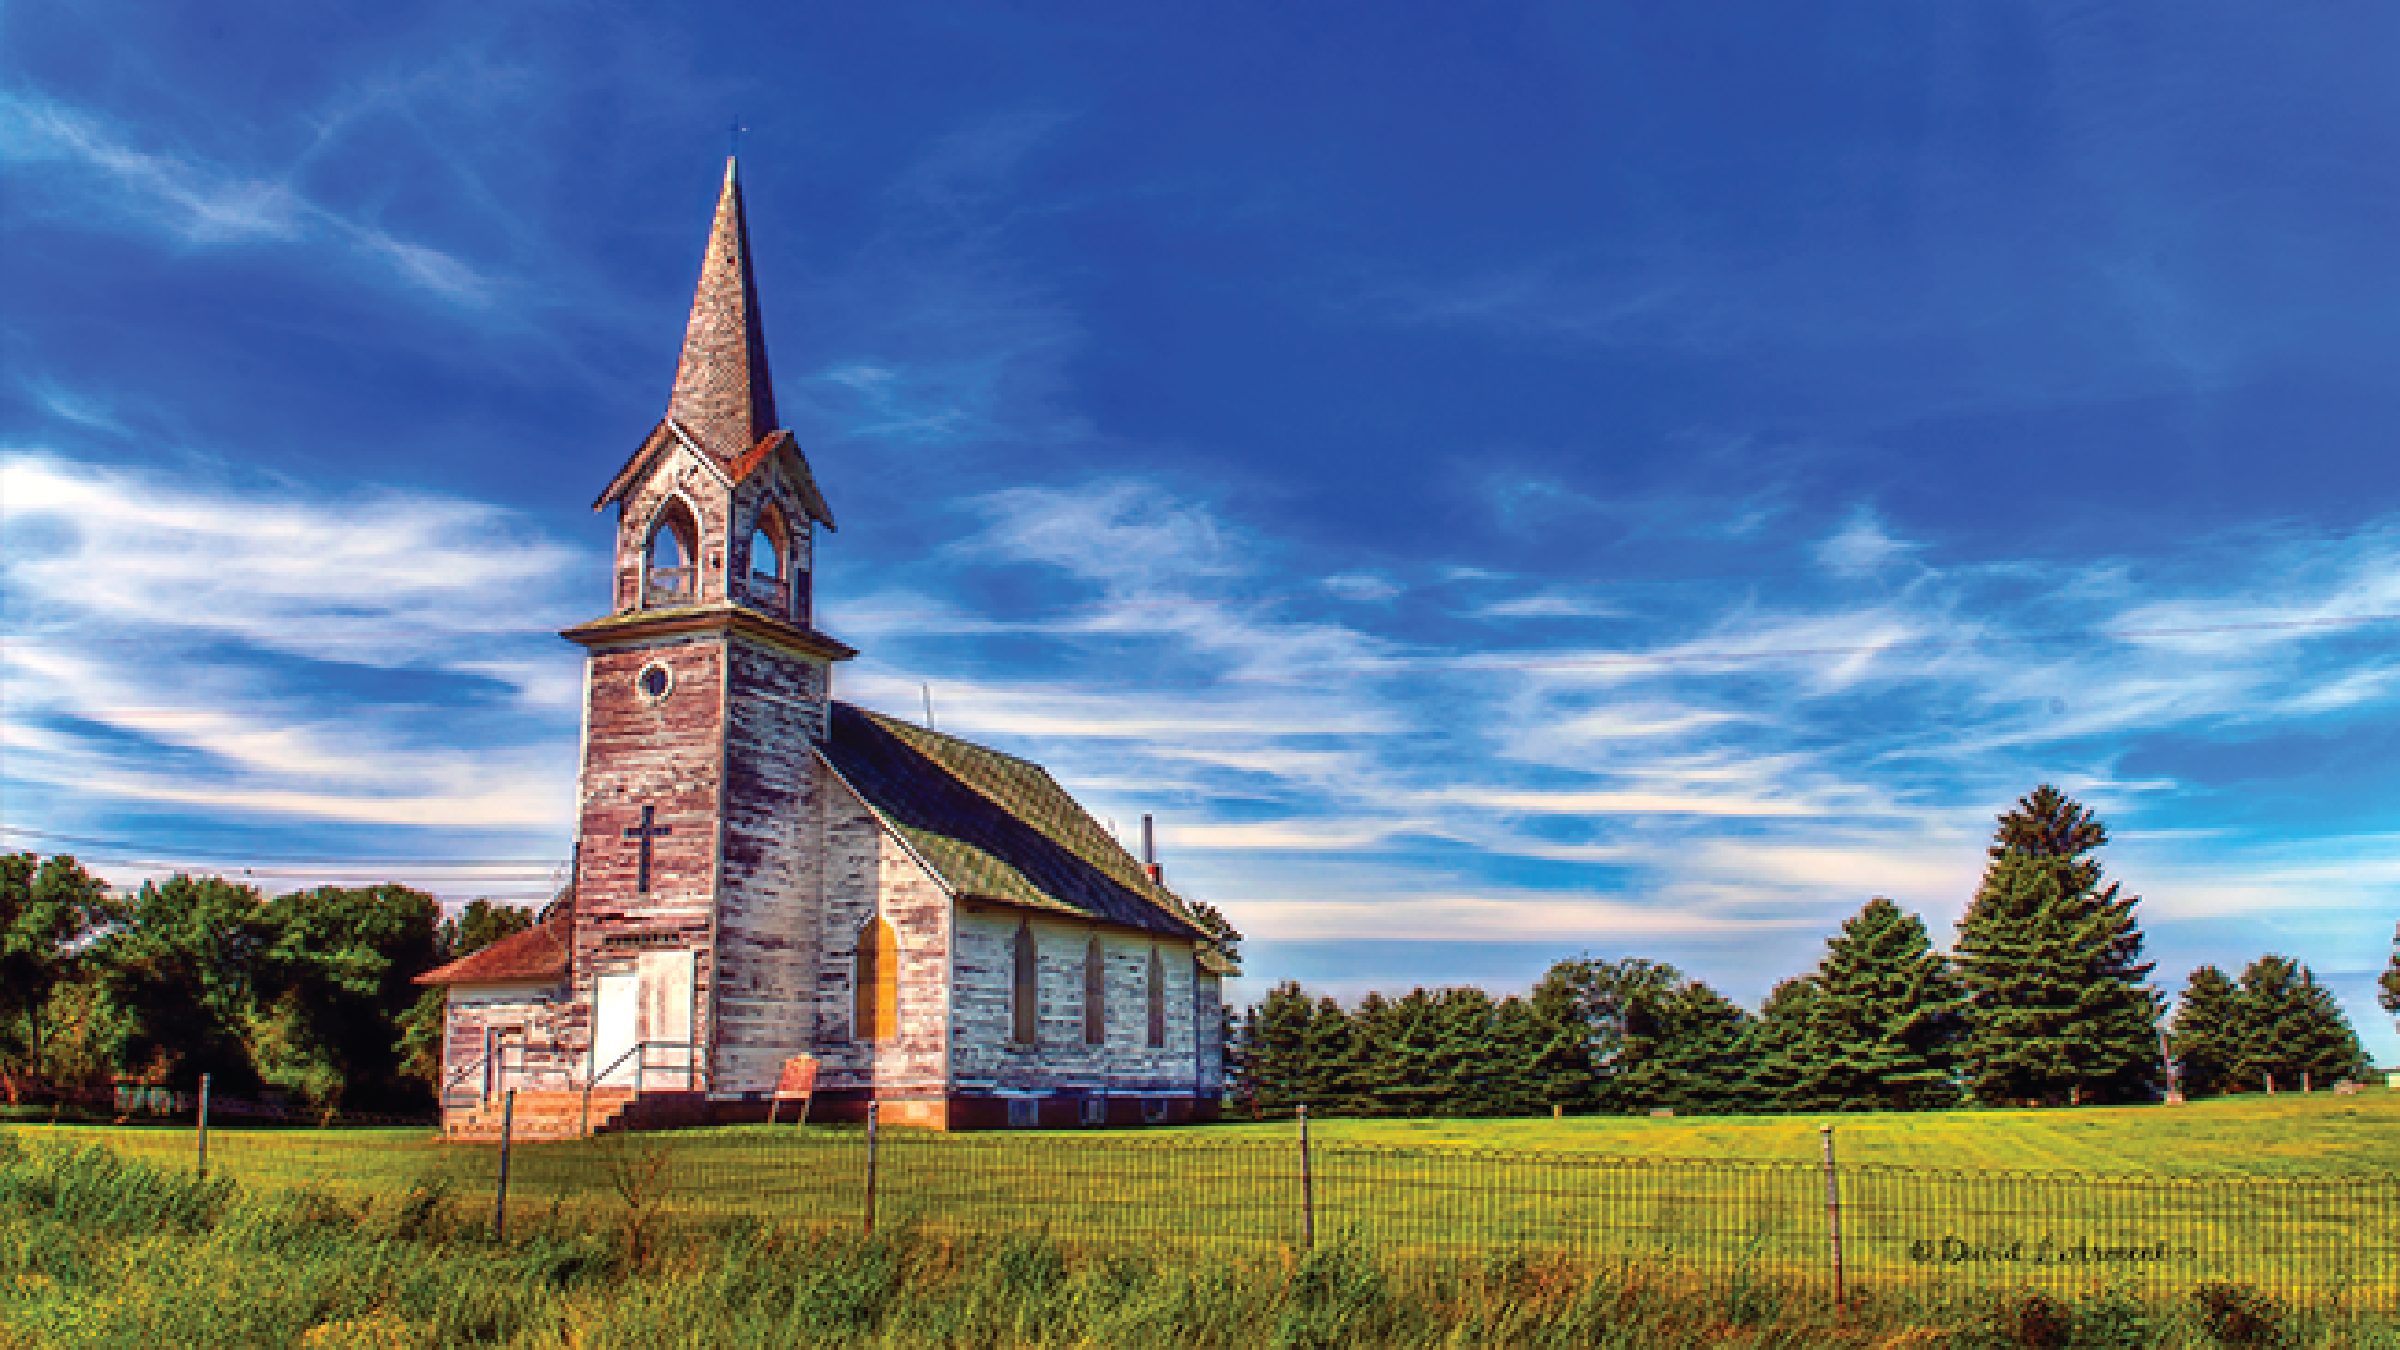 COMMENTARY: Rural Churches Back to the Future